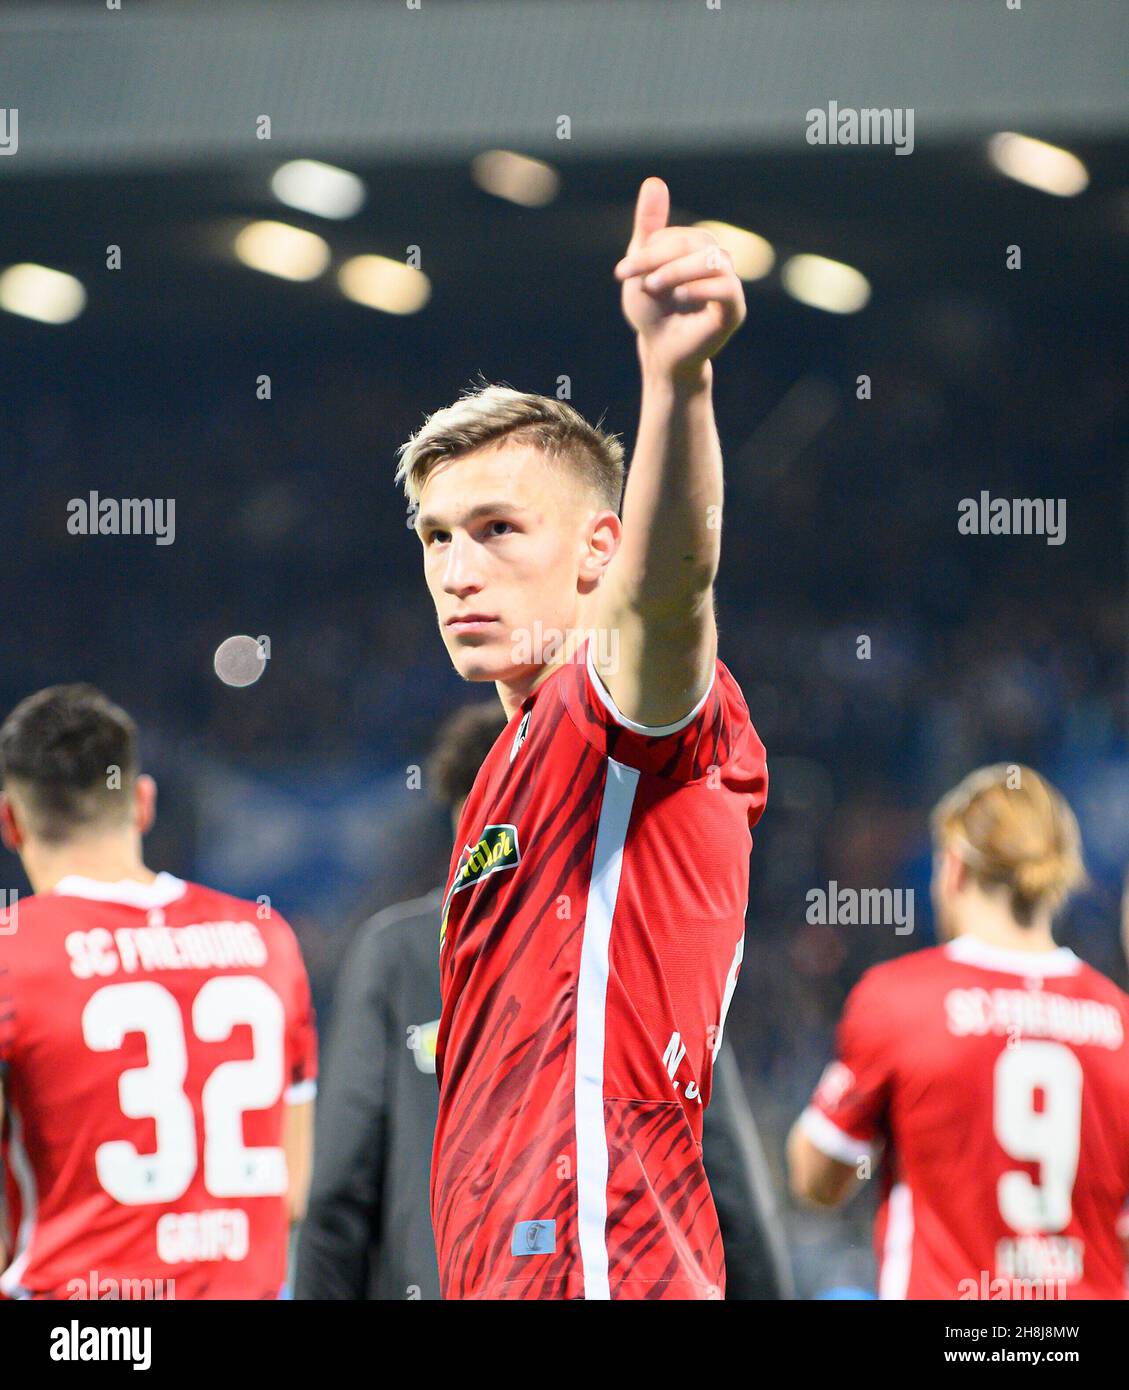 Nico SCHLOTTERBECK (FR) gesture, gesture, thumb shows after up. Soccer 1st Bundesliga, 13th matchday, VfL Bochum (BO) - SC Freiburg (FR) 2: 1, on November 27, 2021 in Bochum/Germany. #DFL regulations prohibit any use of photographs as image sequences and/or quasi-video # Â Stock Photo